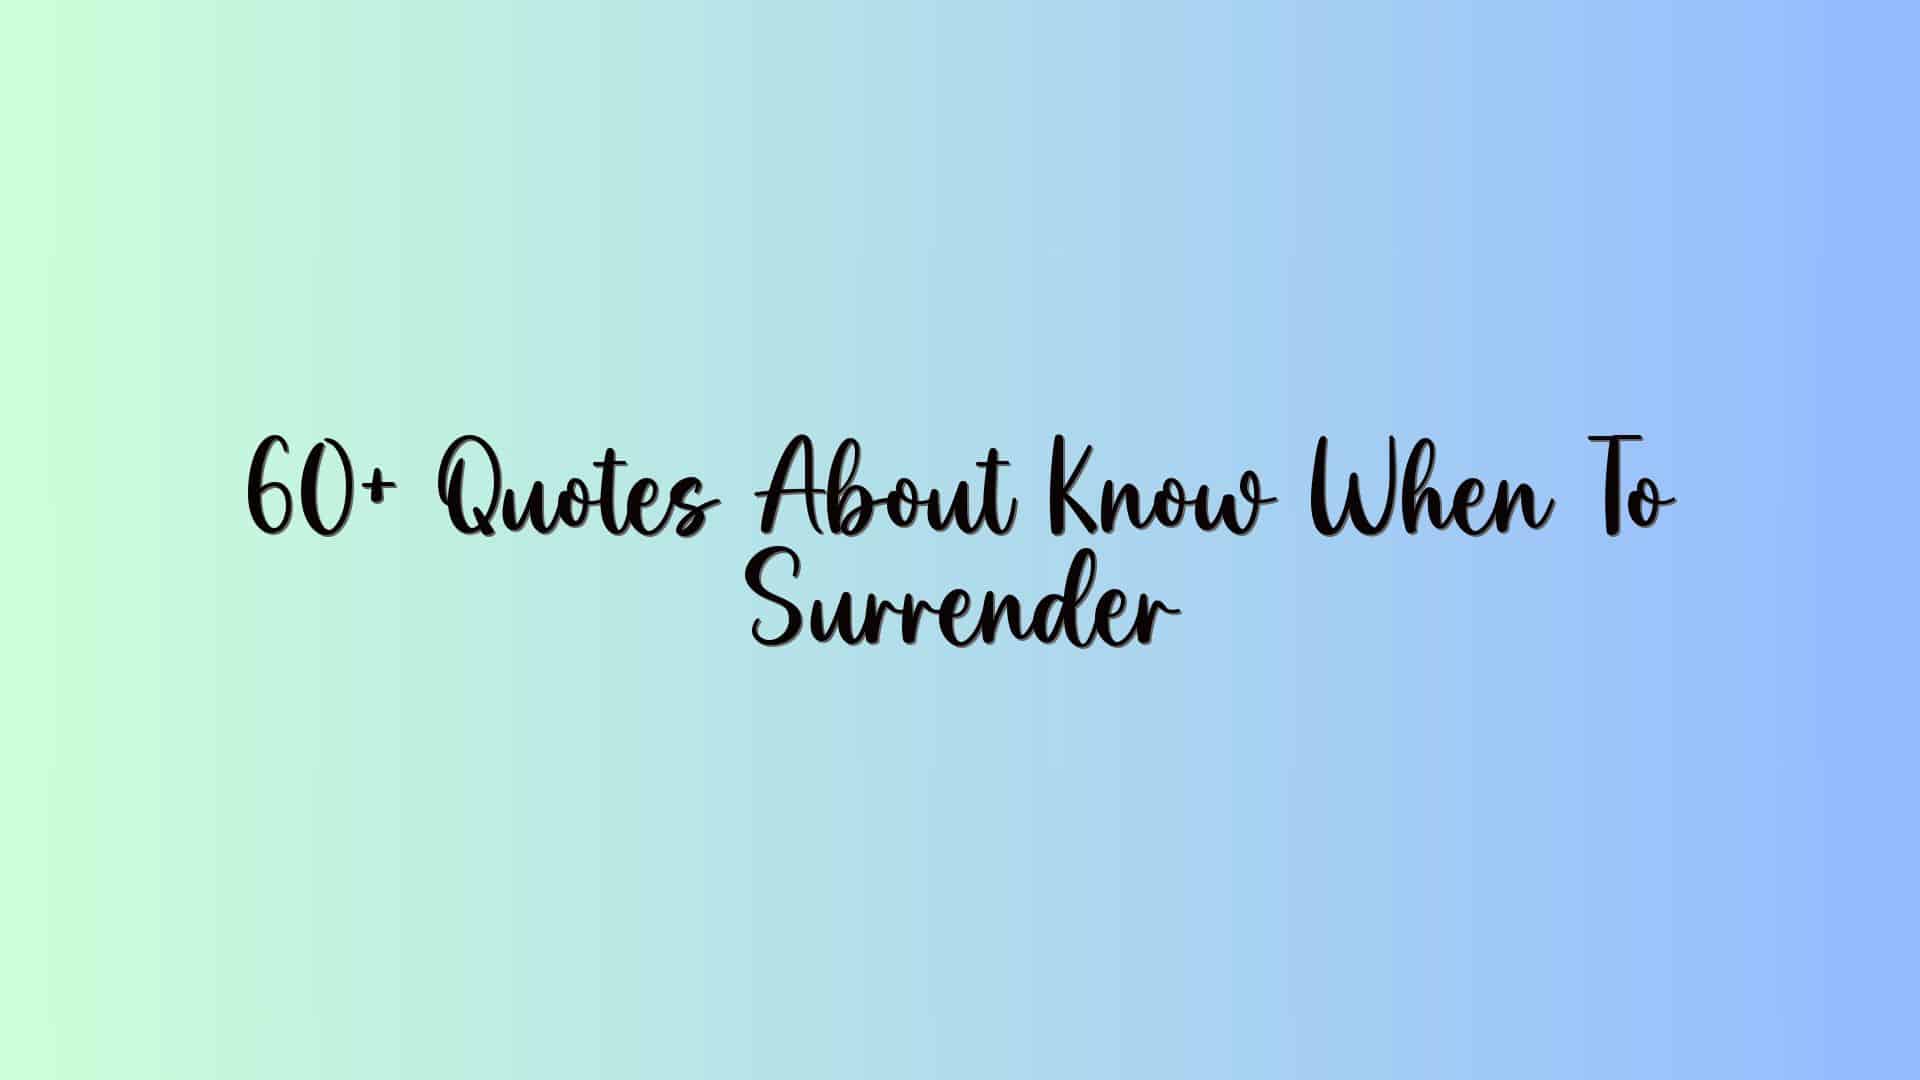 60+ Quotes About Know When To Surrender